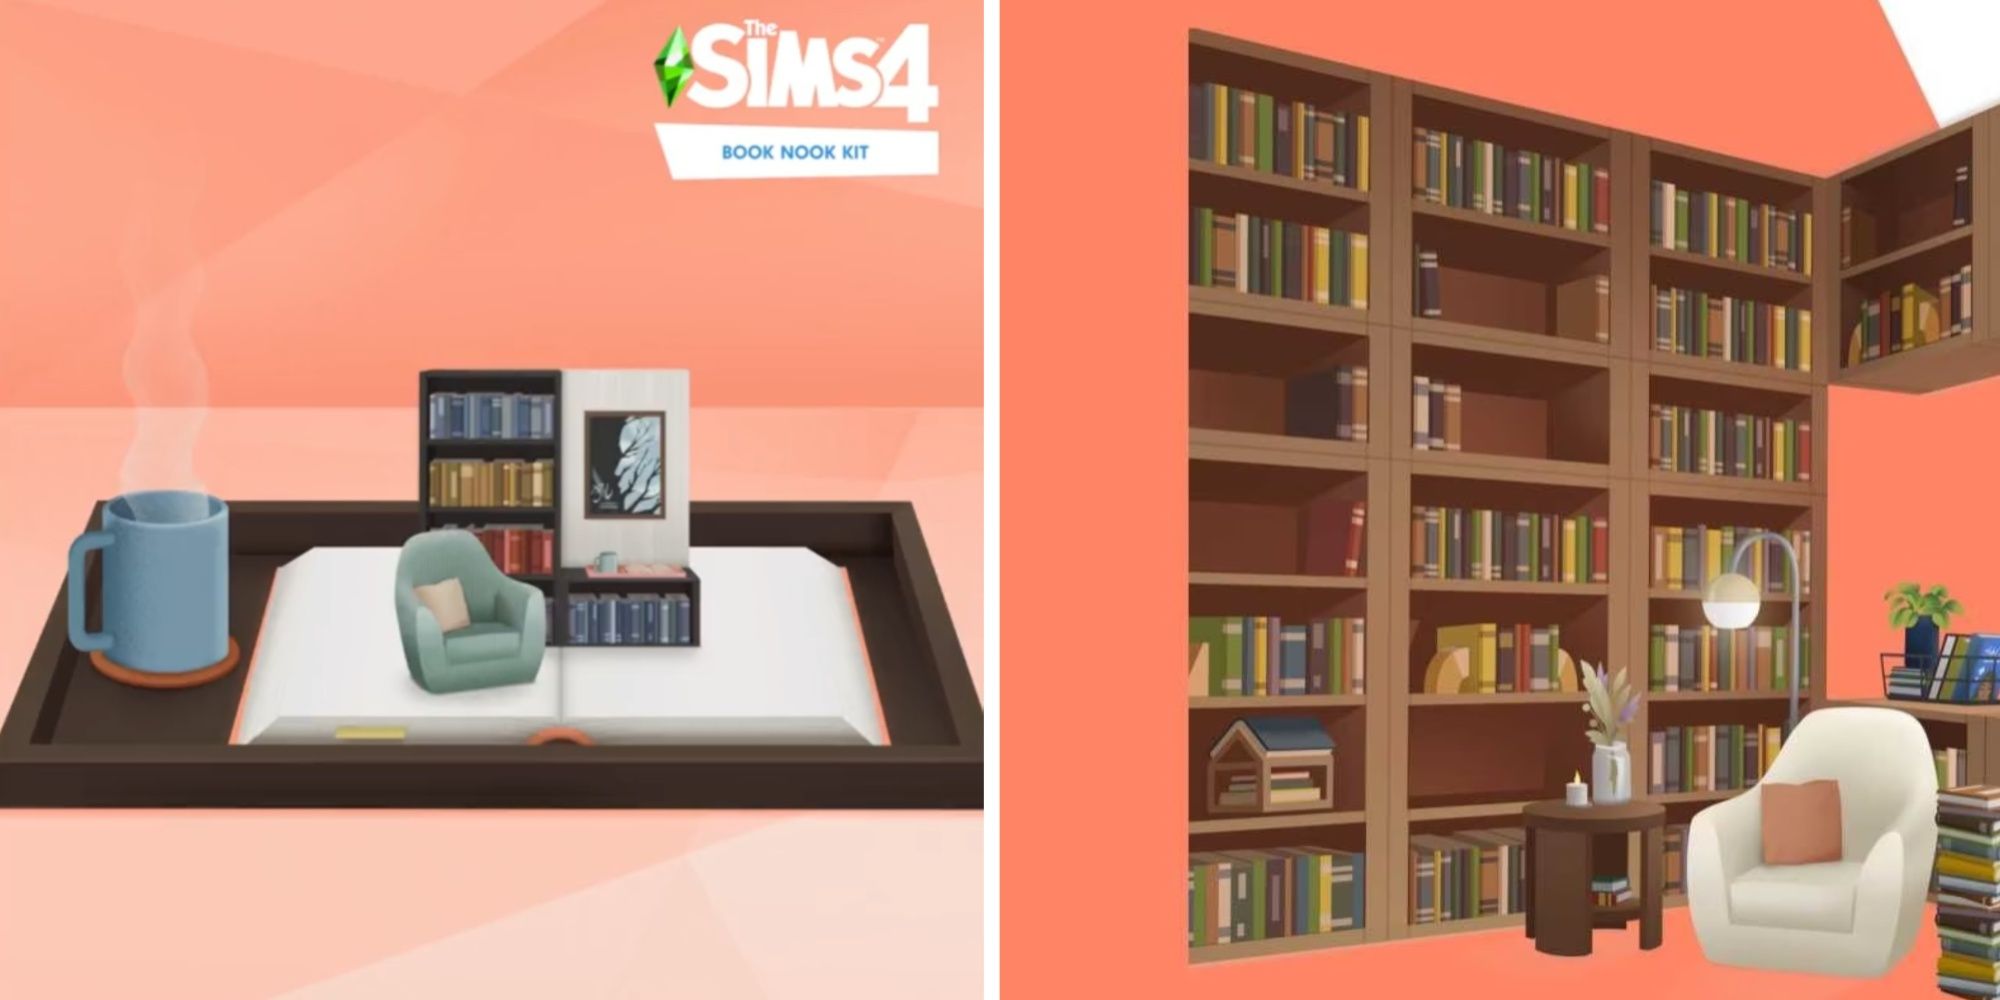 book nook kit promotional images for the sims 4